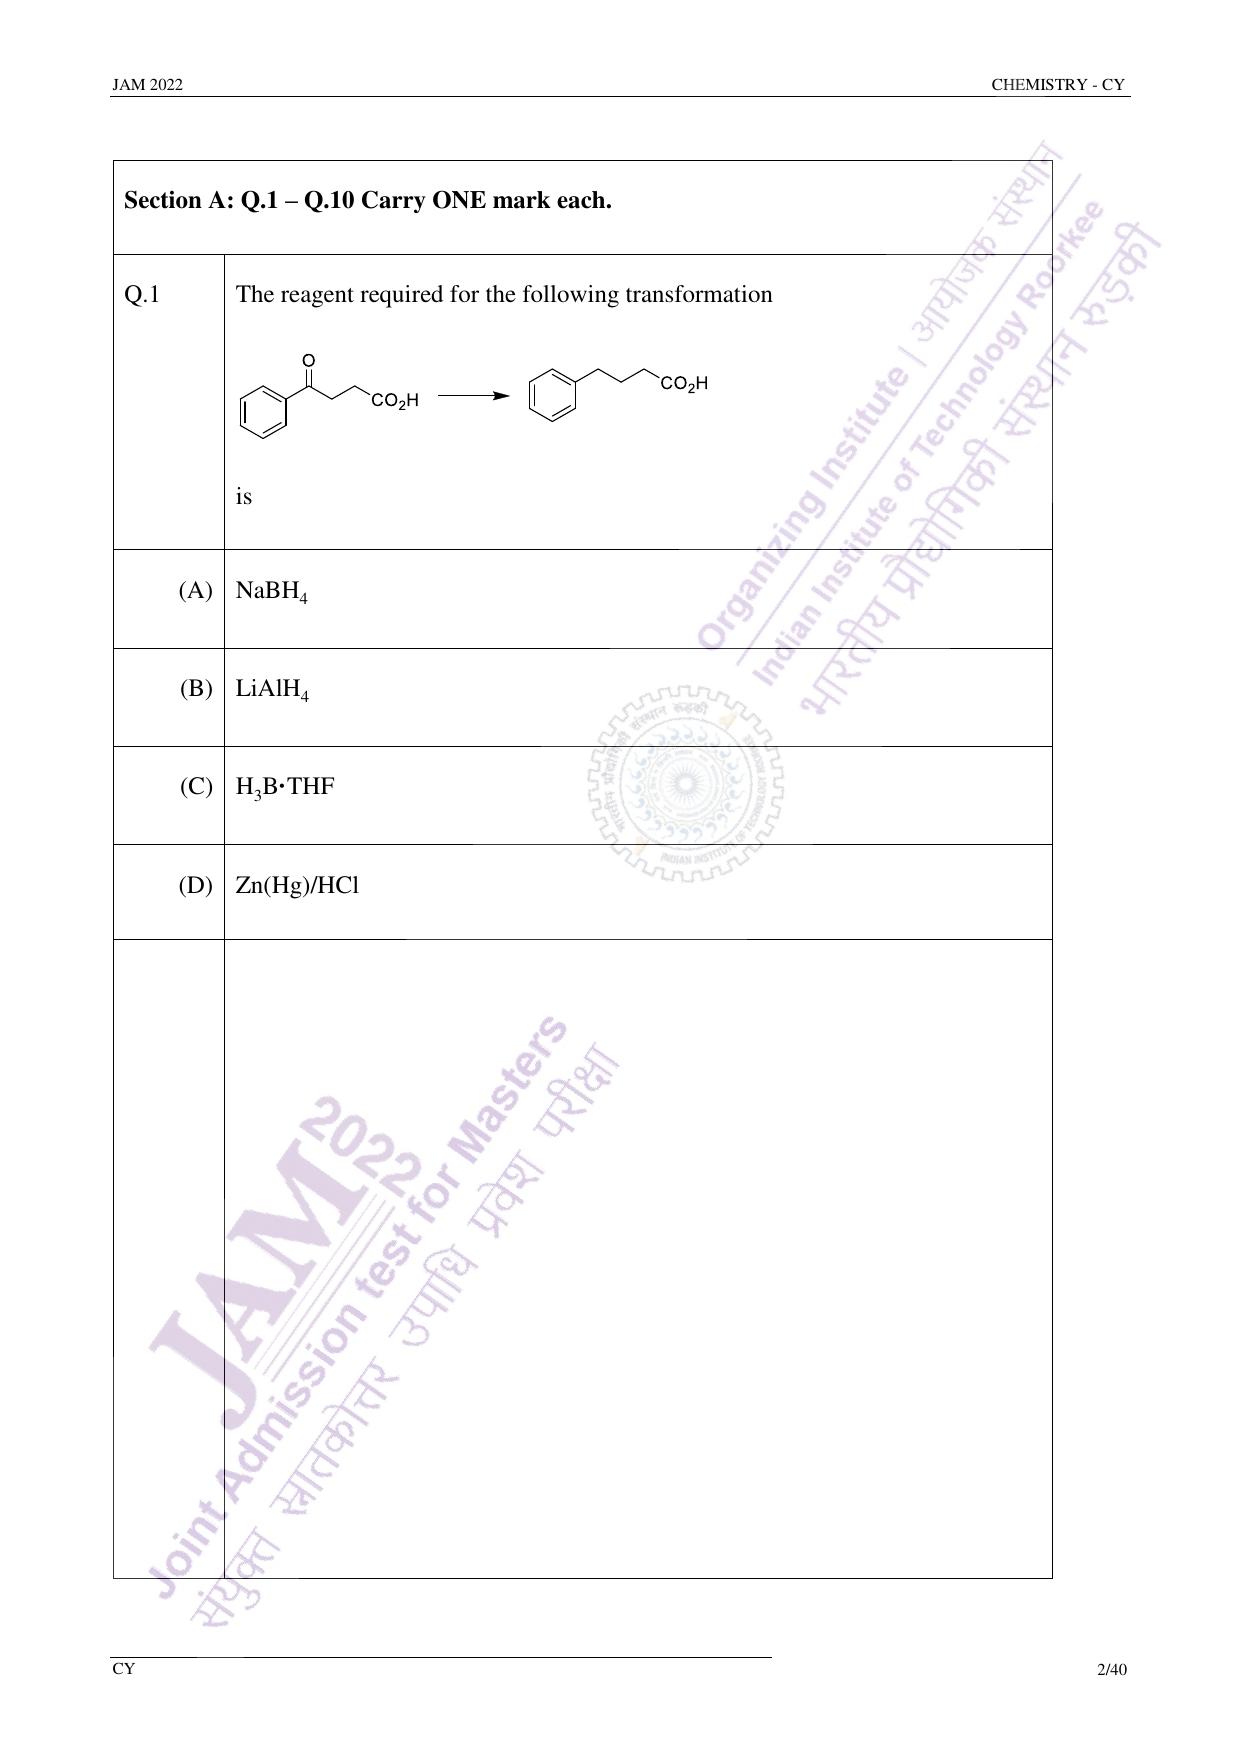 JAM 2022: CY Question Paper - Page 1